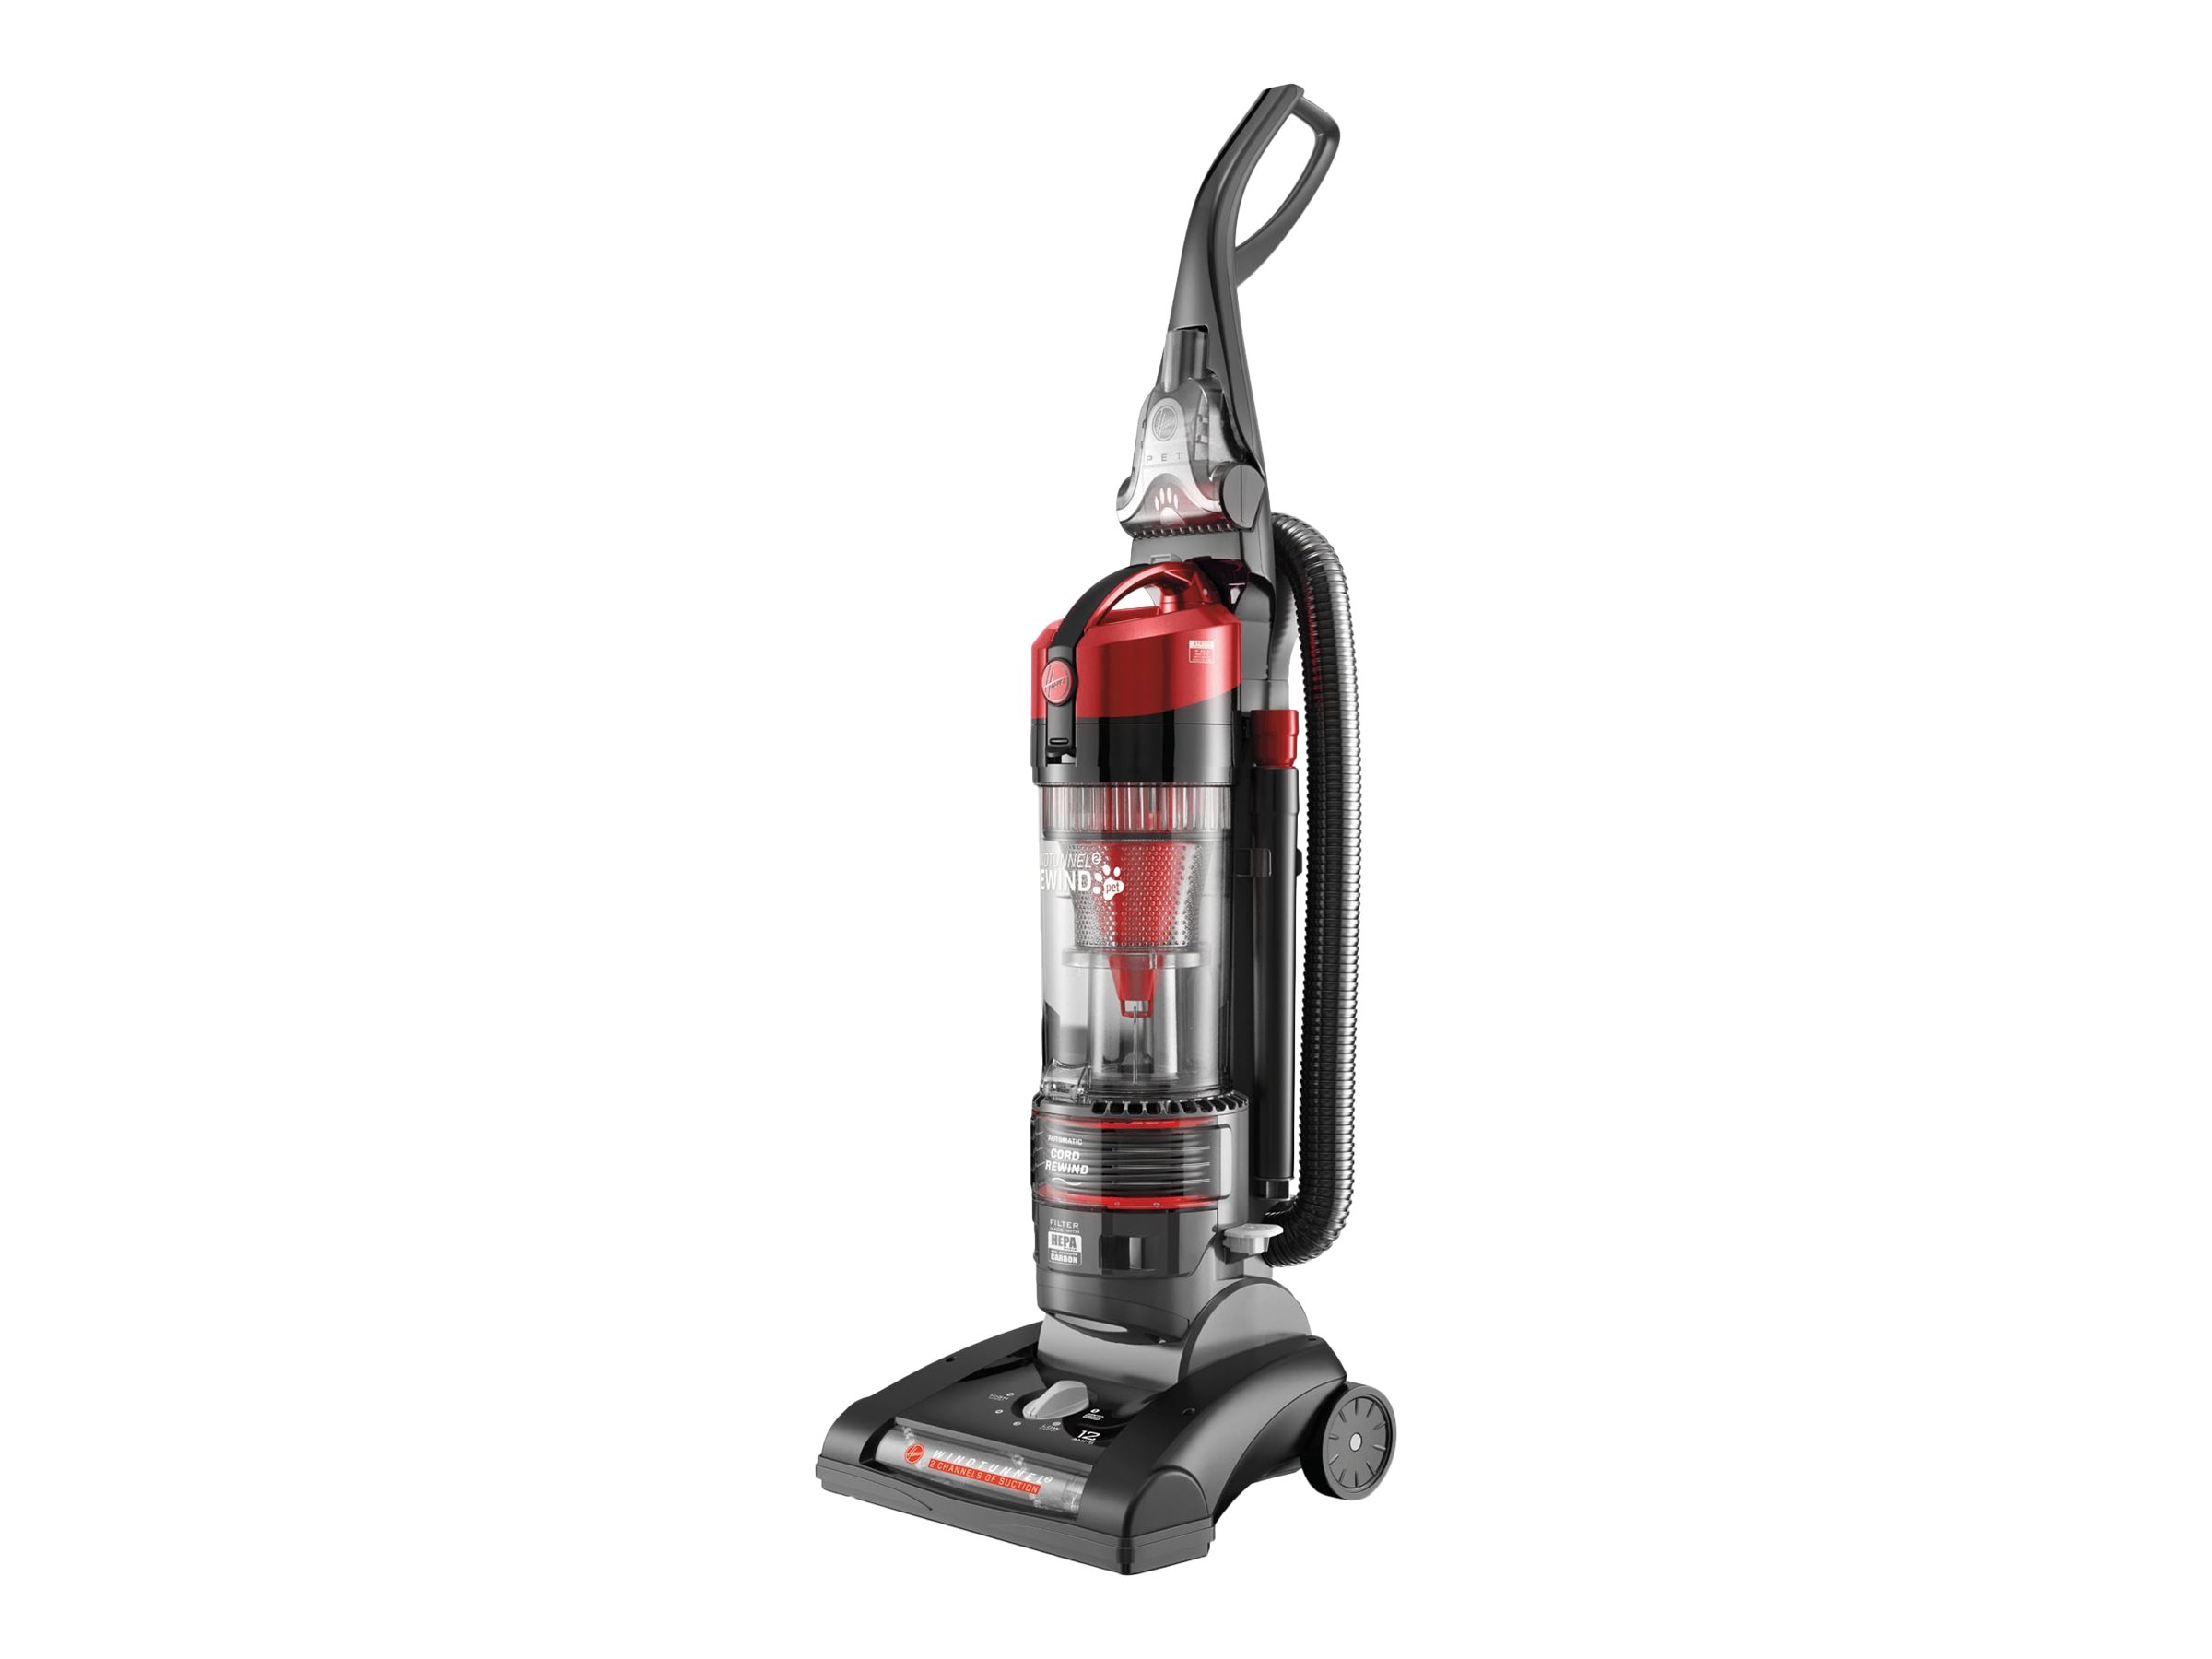 Hoover WindTunnel 2 Rewind Pet Upright Bagless Vacuum Cleaner, UH70830 - image 4 of 12